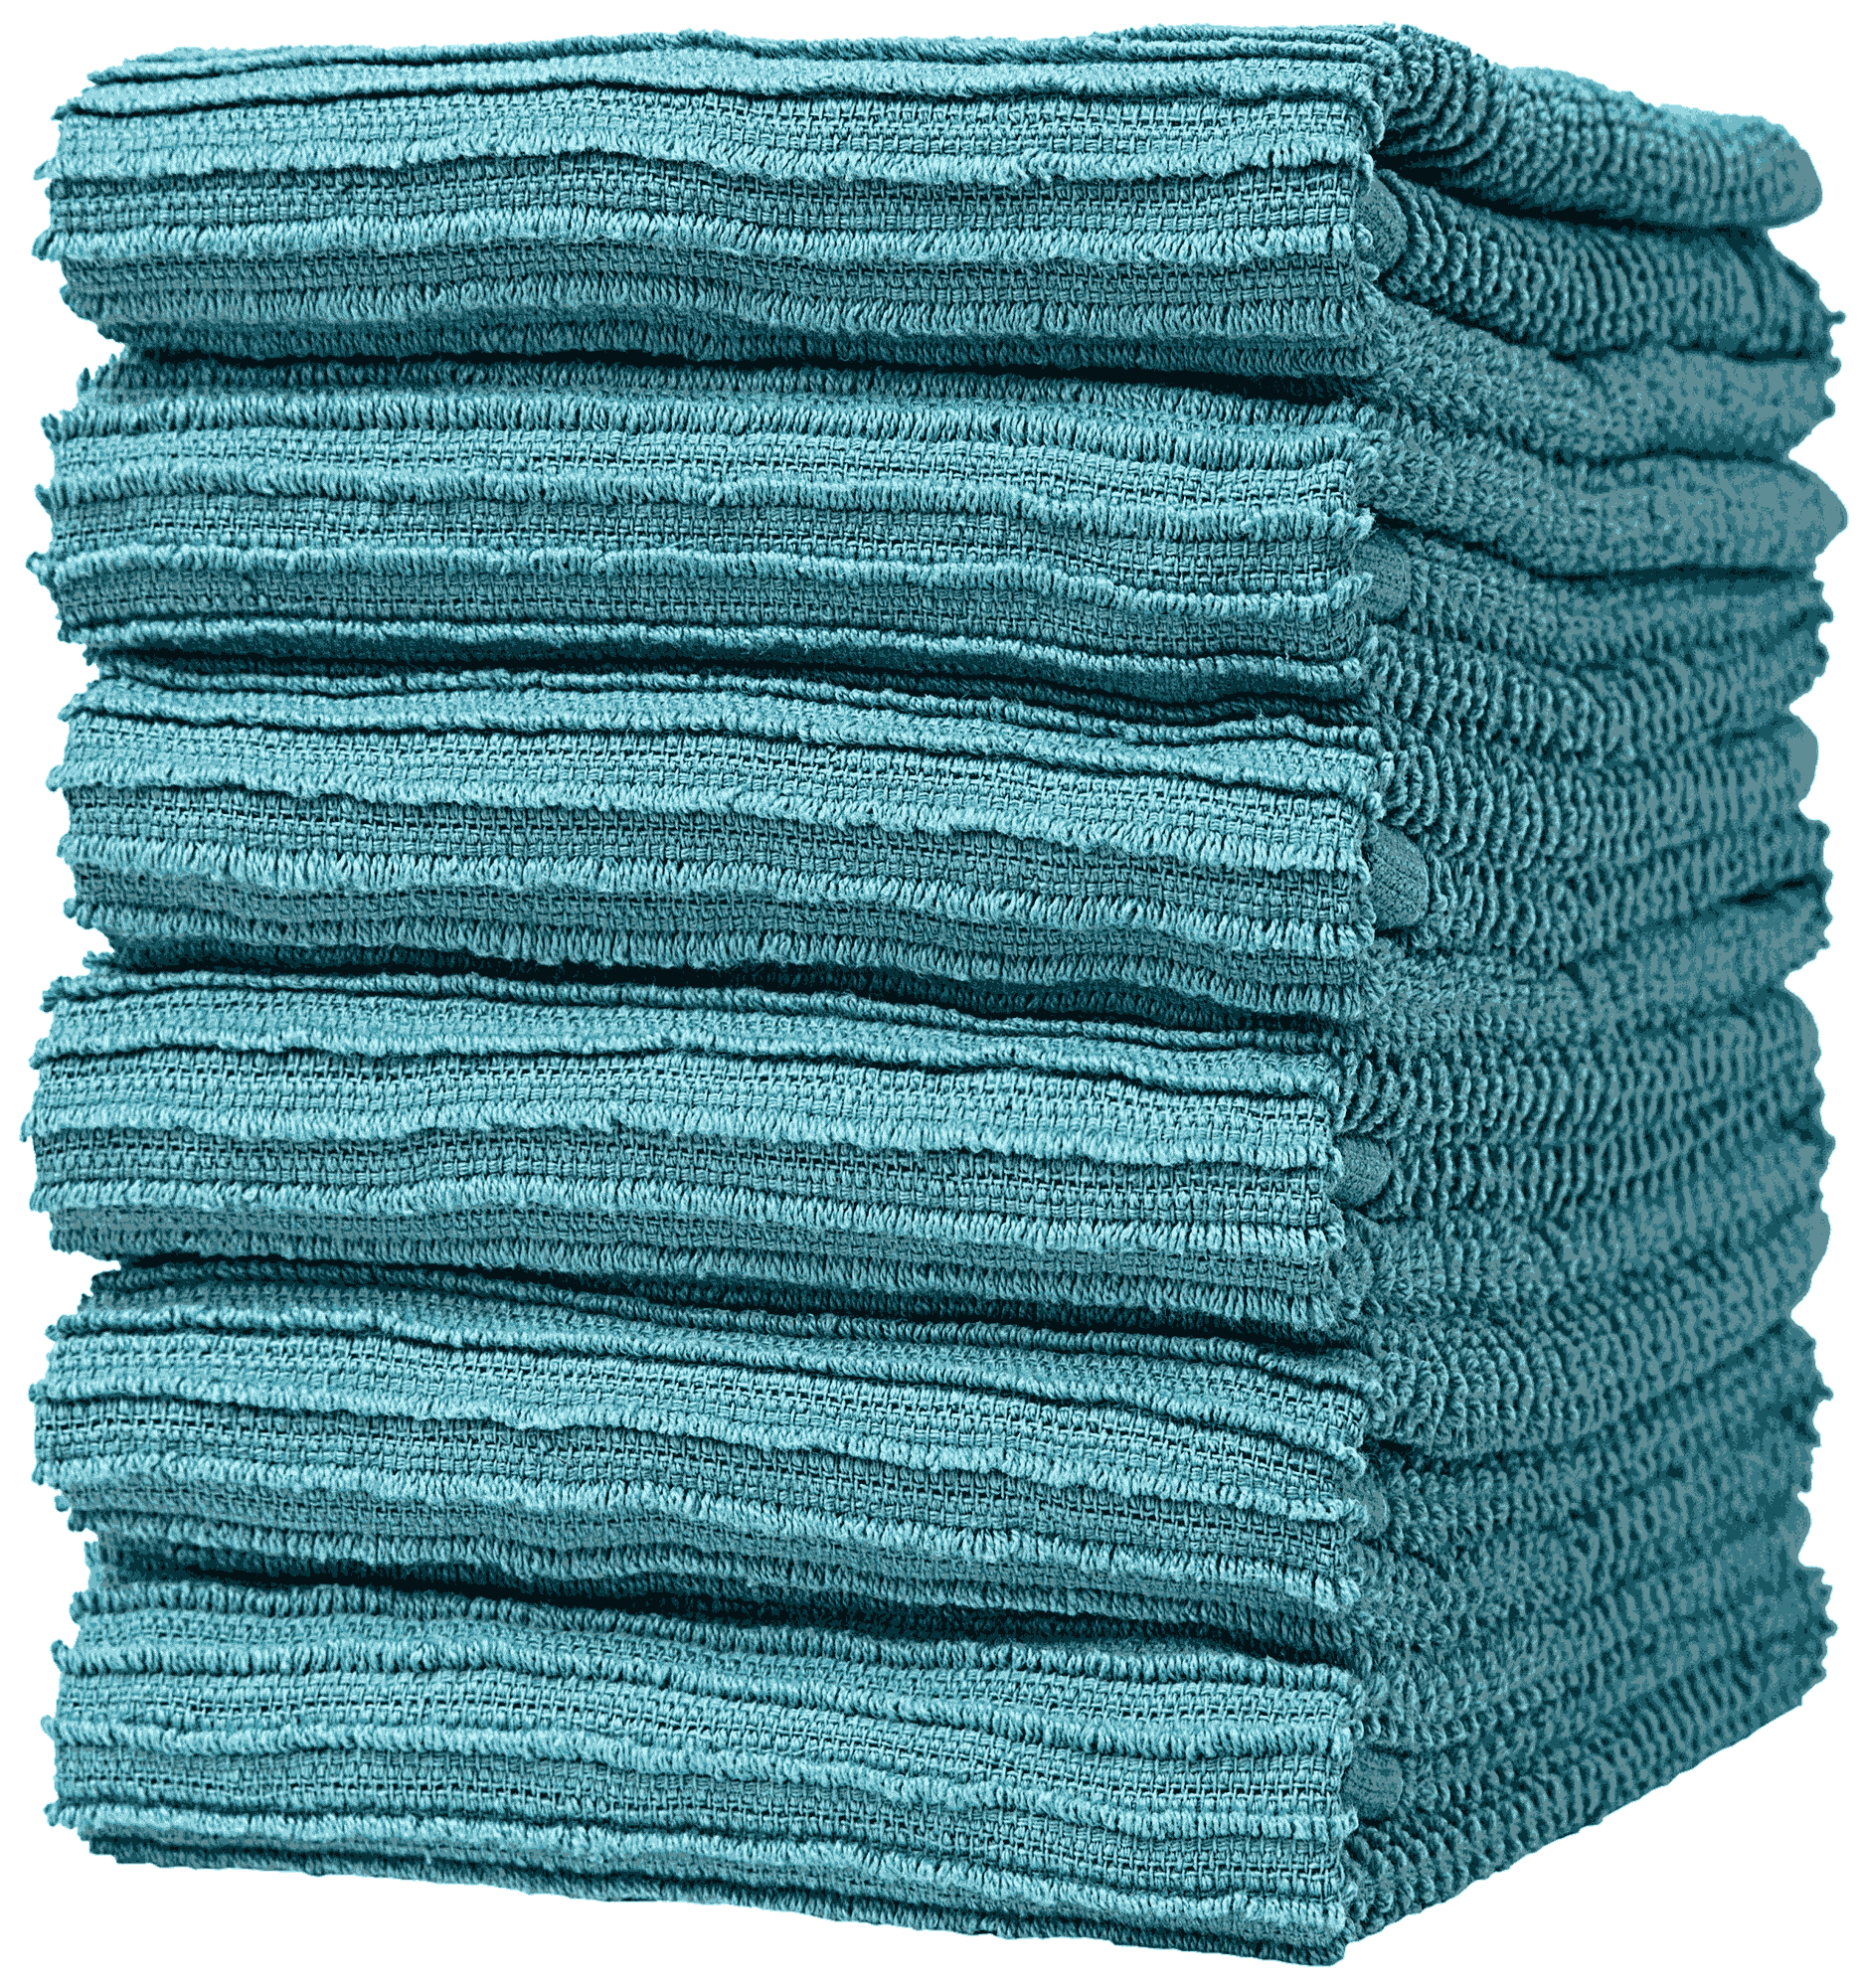 Weft Insert Kitchen Towels - Best Quality in Cheap Price – Bumble